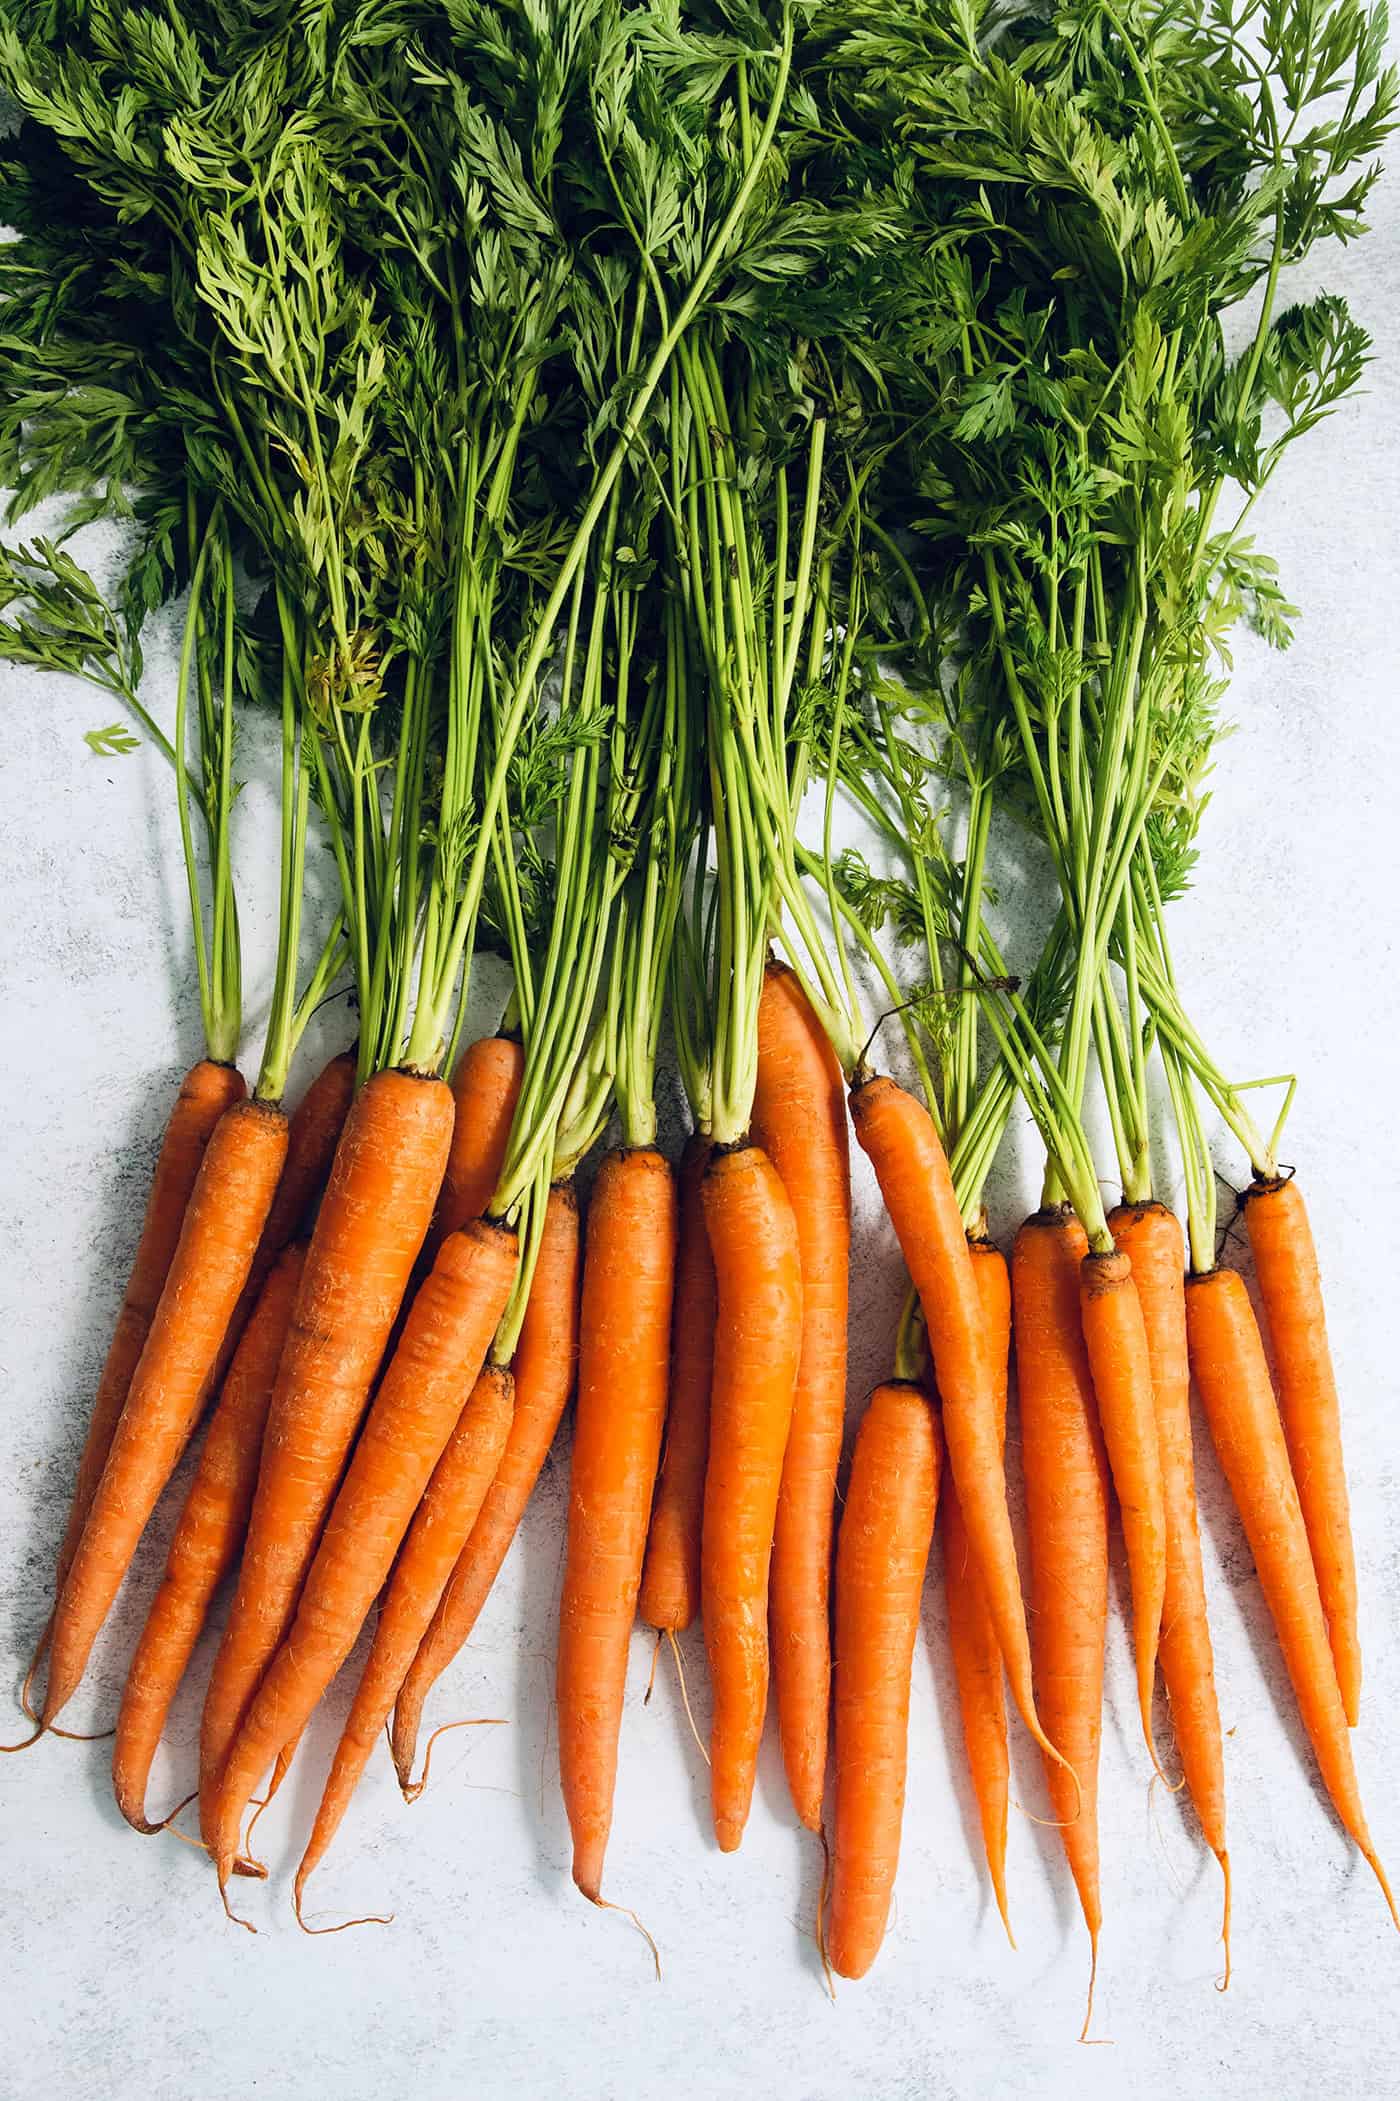 whole carrots with green tops